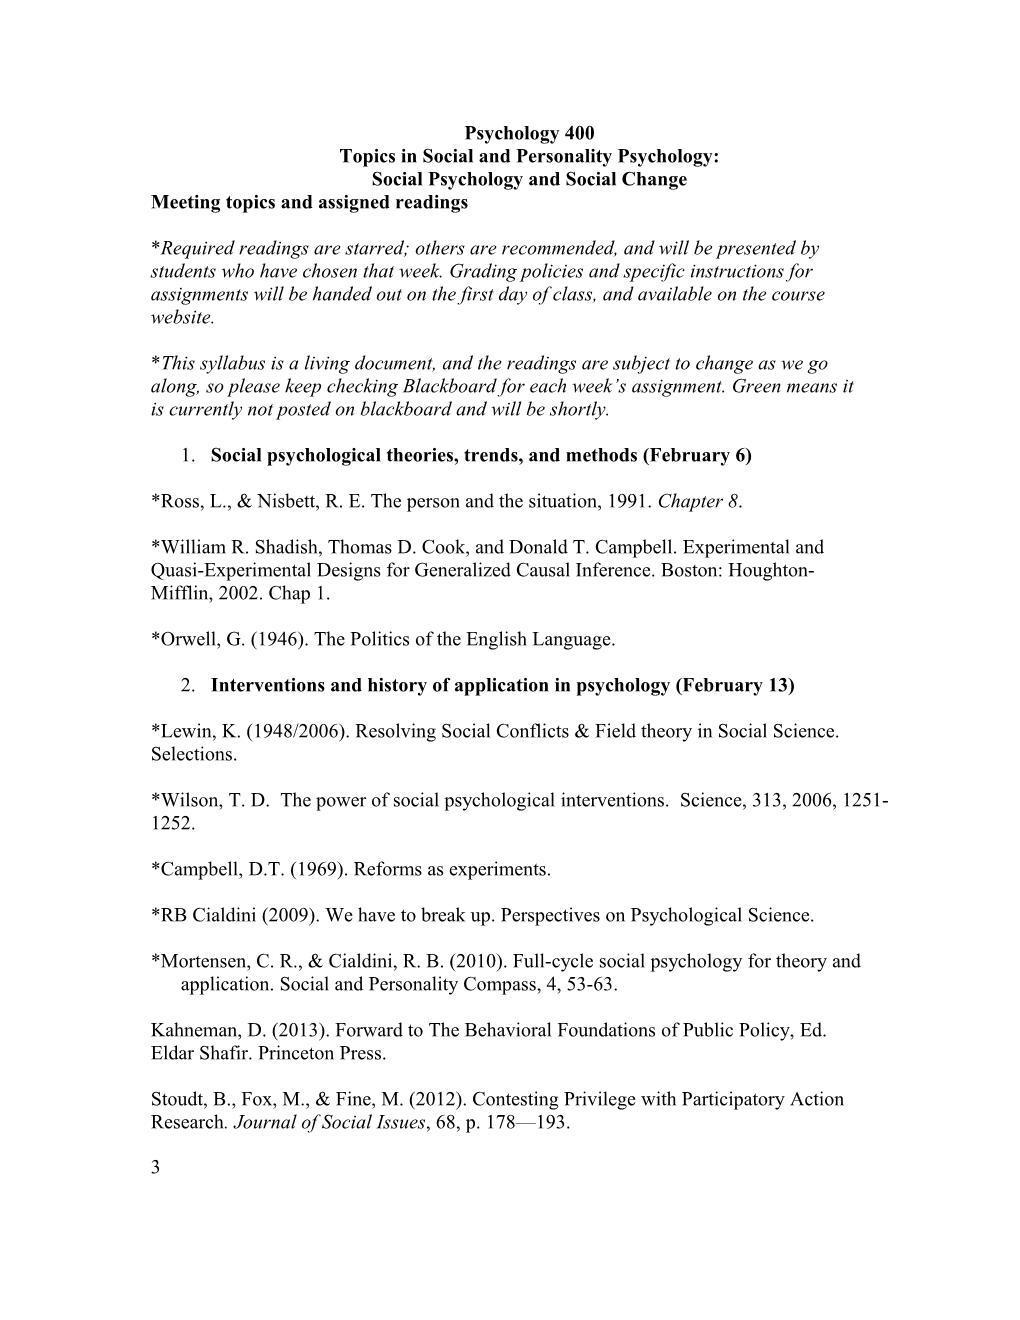 Topics in Social and Personality Psychology